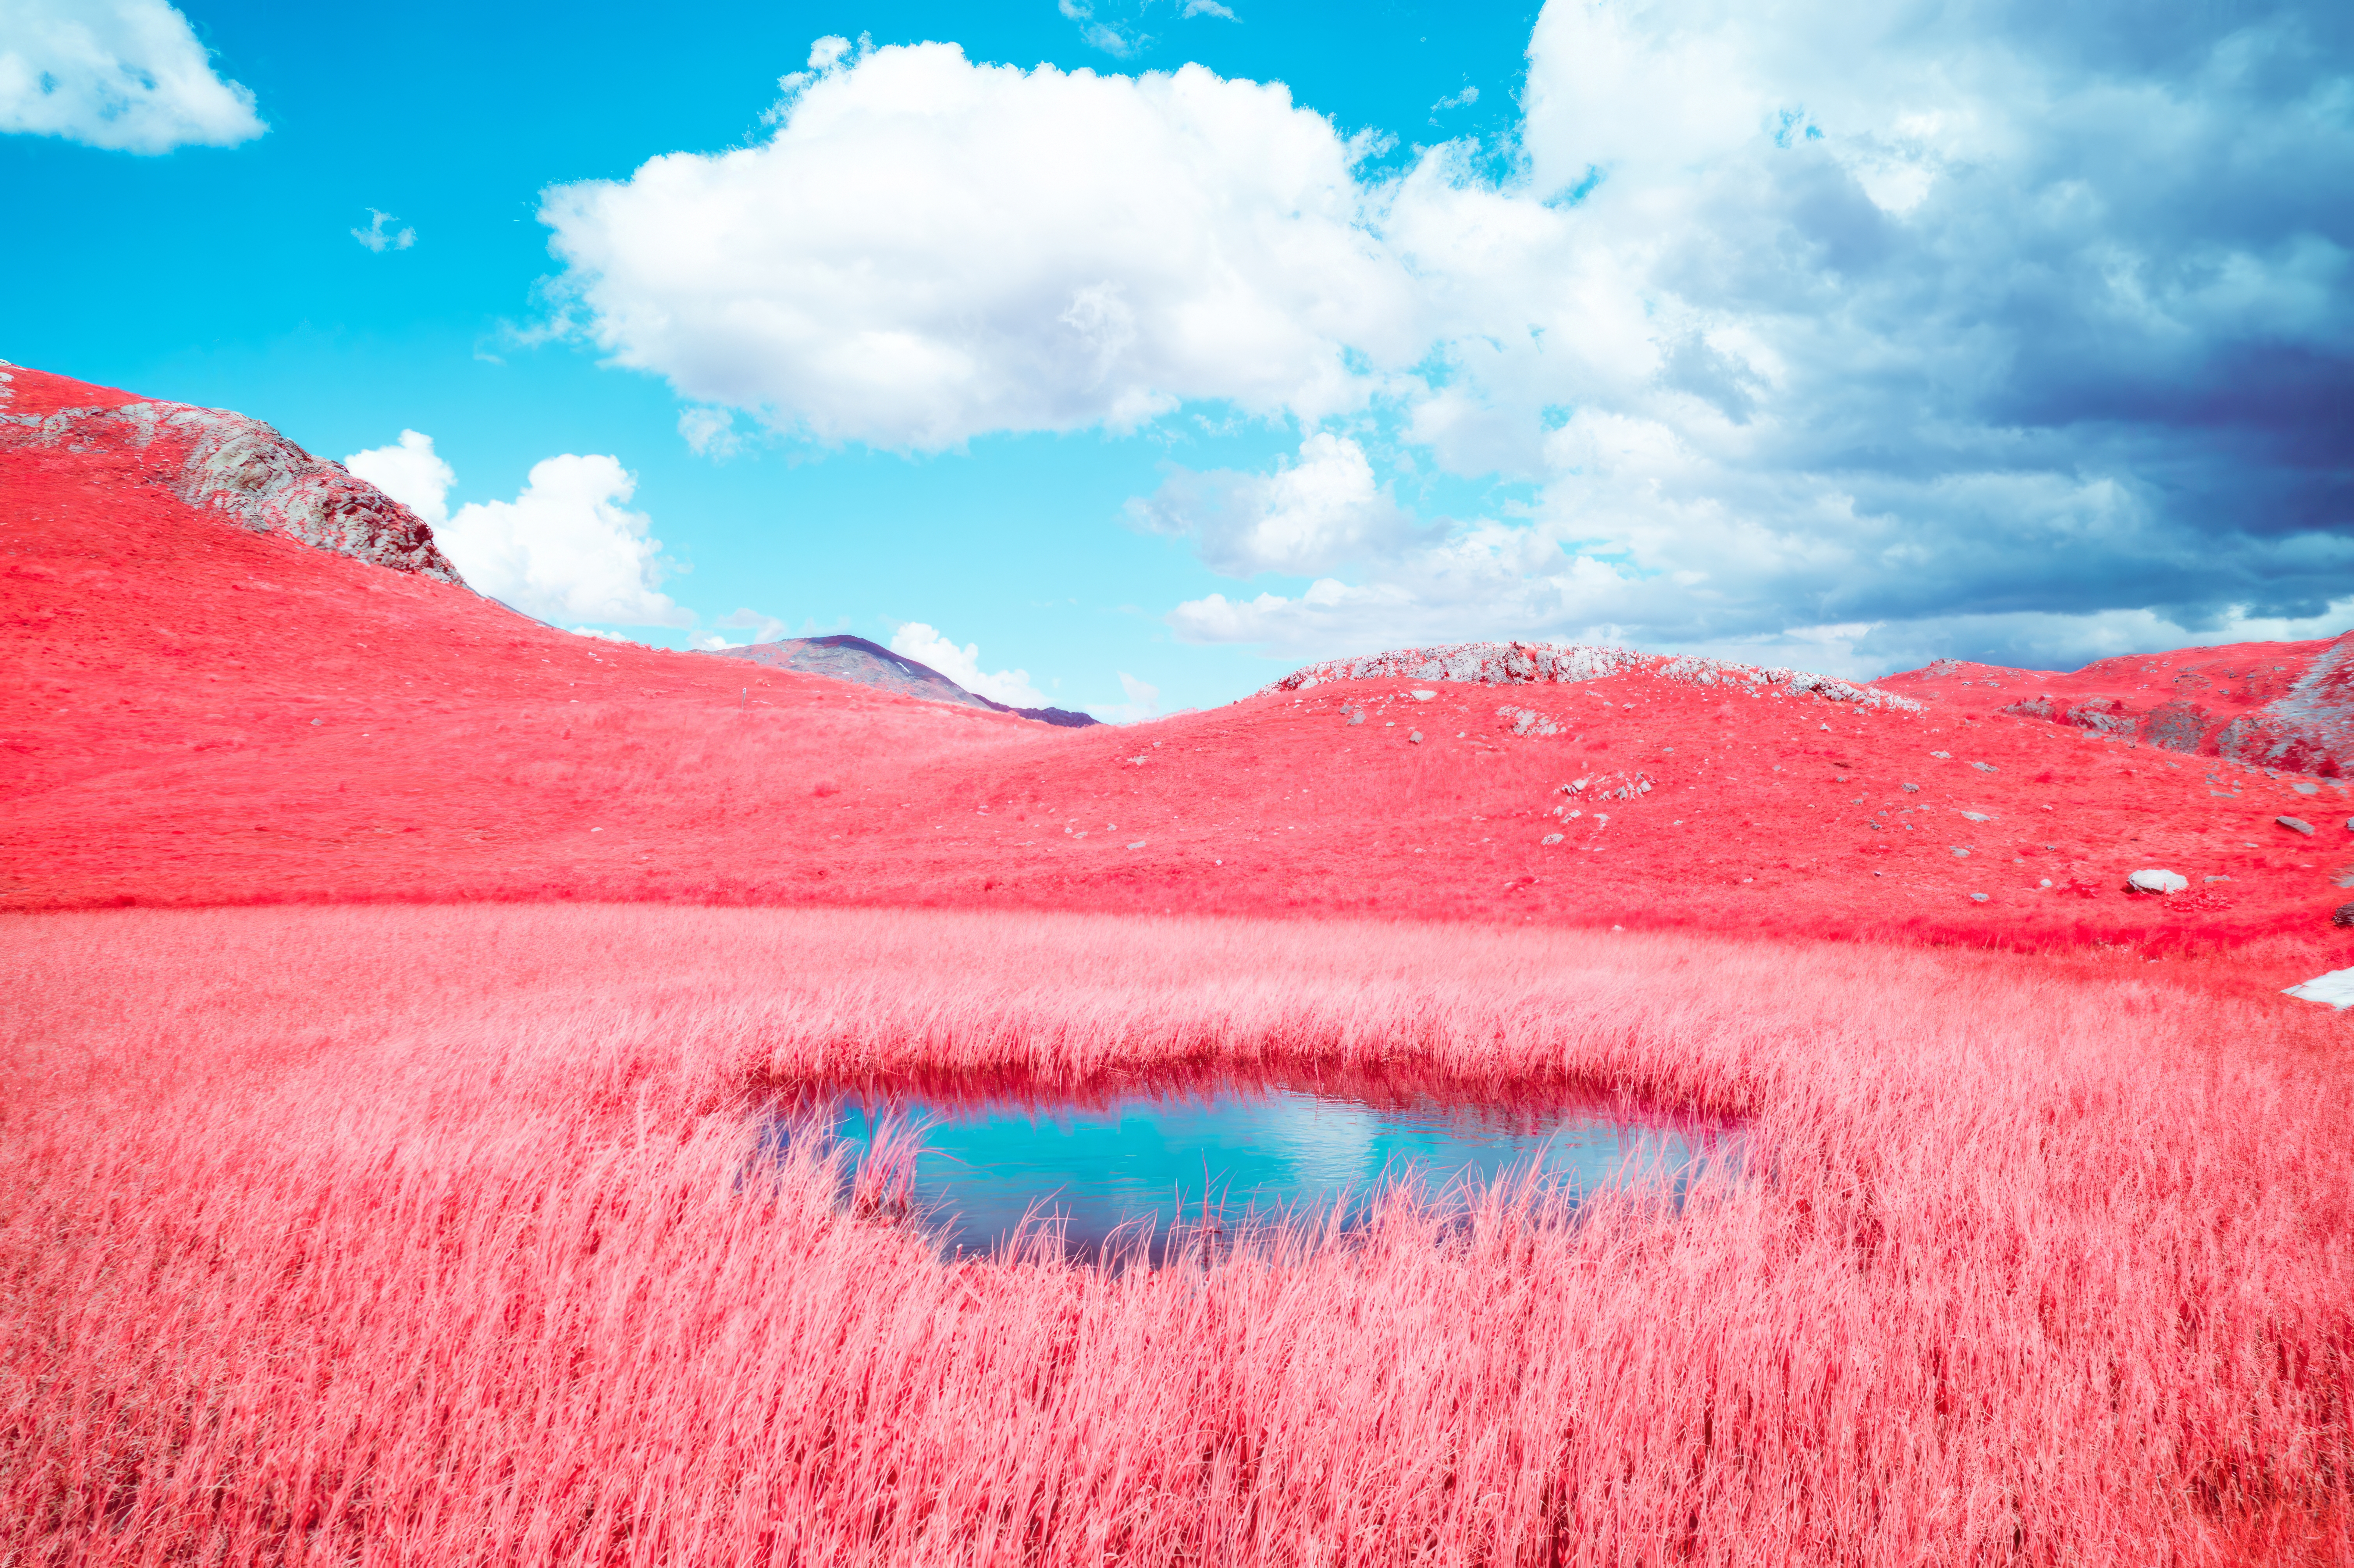 General 6400x4264 infrared nature sky clouds grass pink blue pond mountains surreal